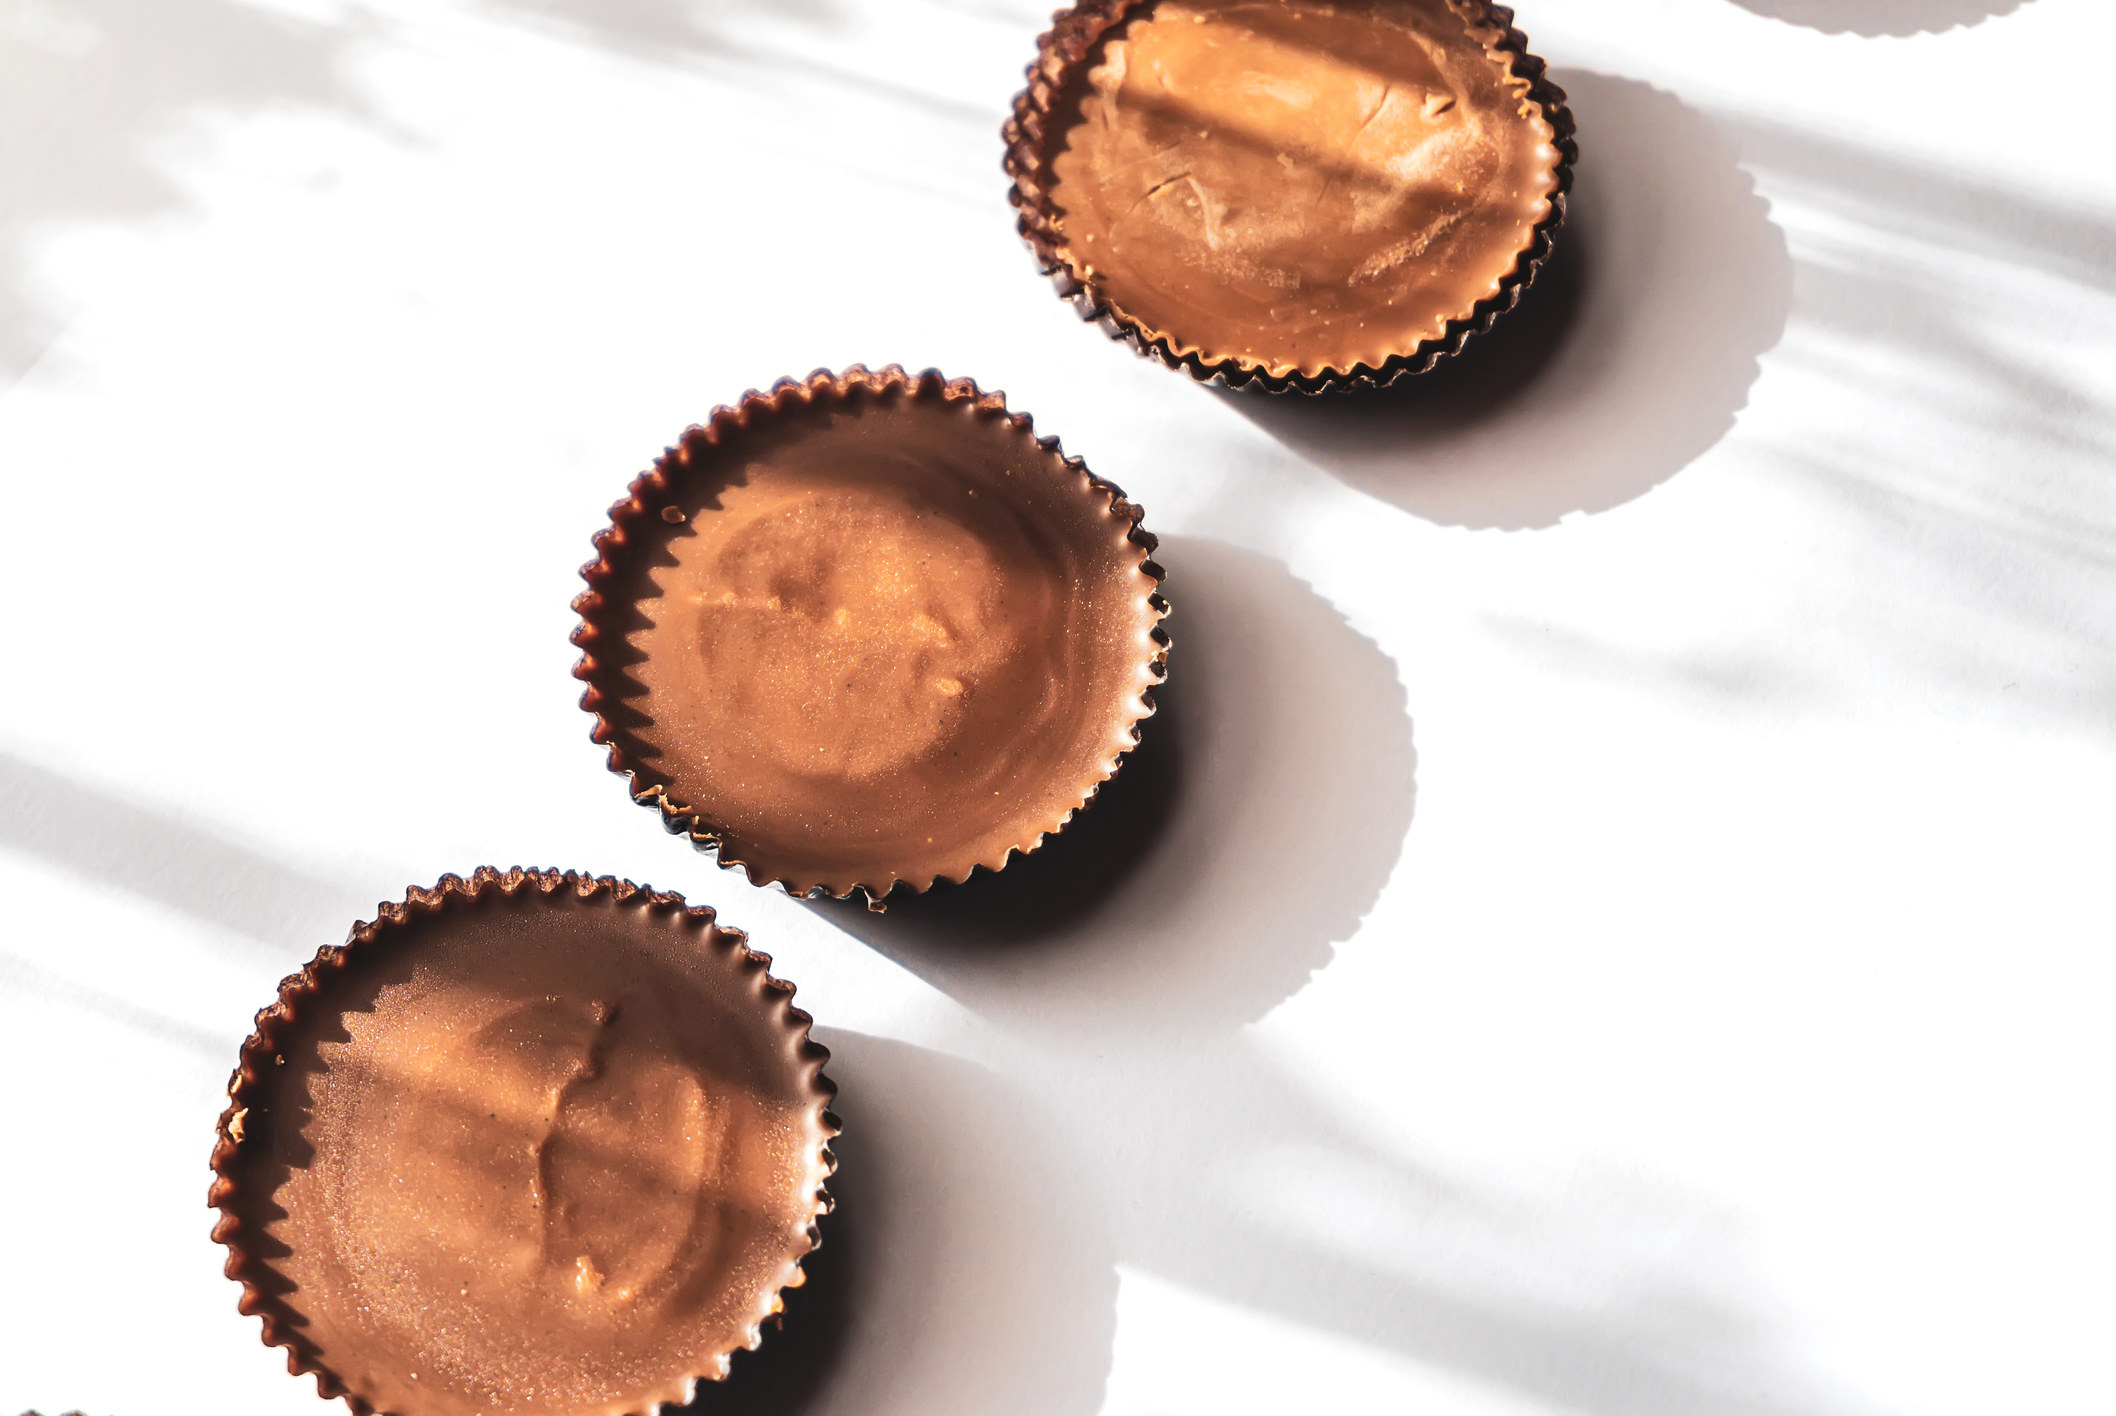 Three chocolate peanut butter cups in their wrapping.